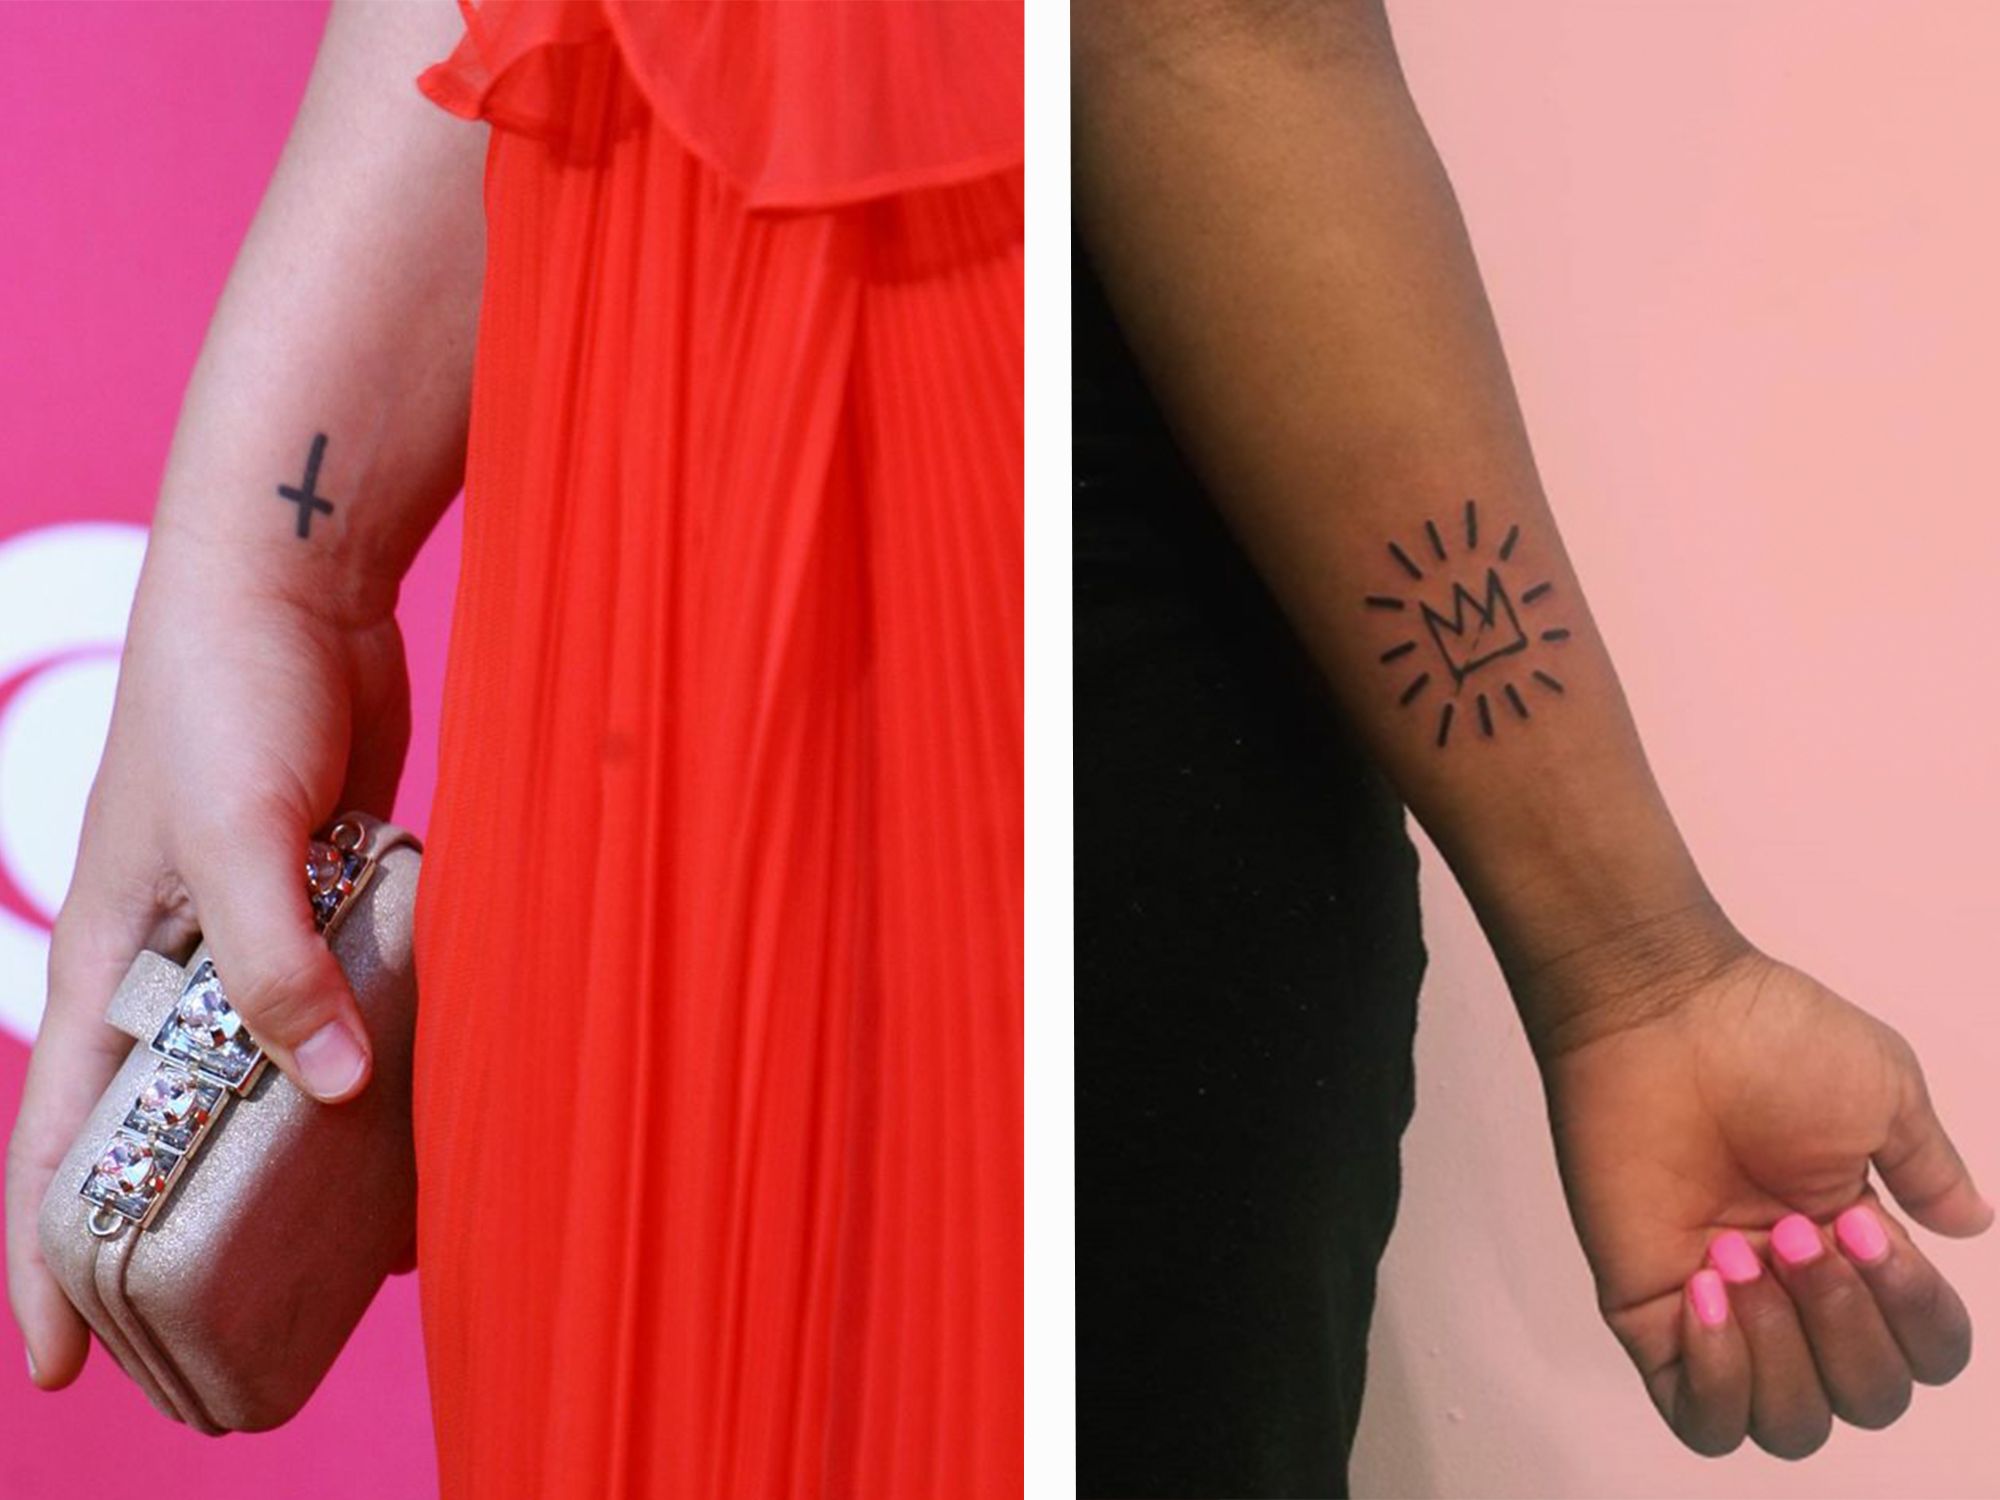 girly sleeve tattoo designs for women